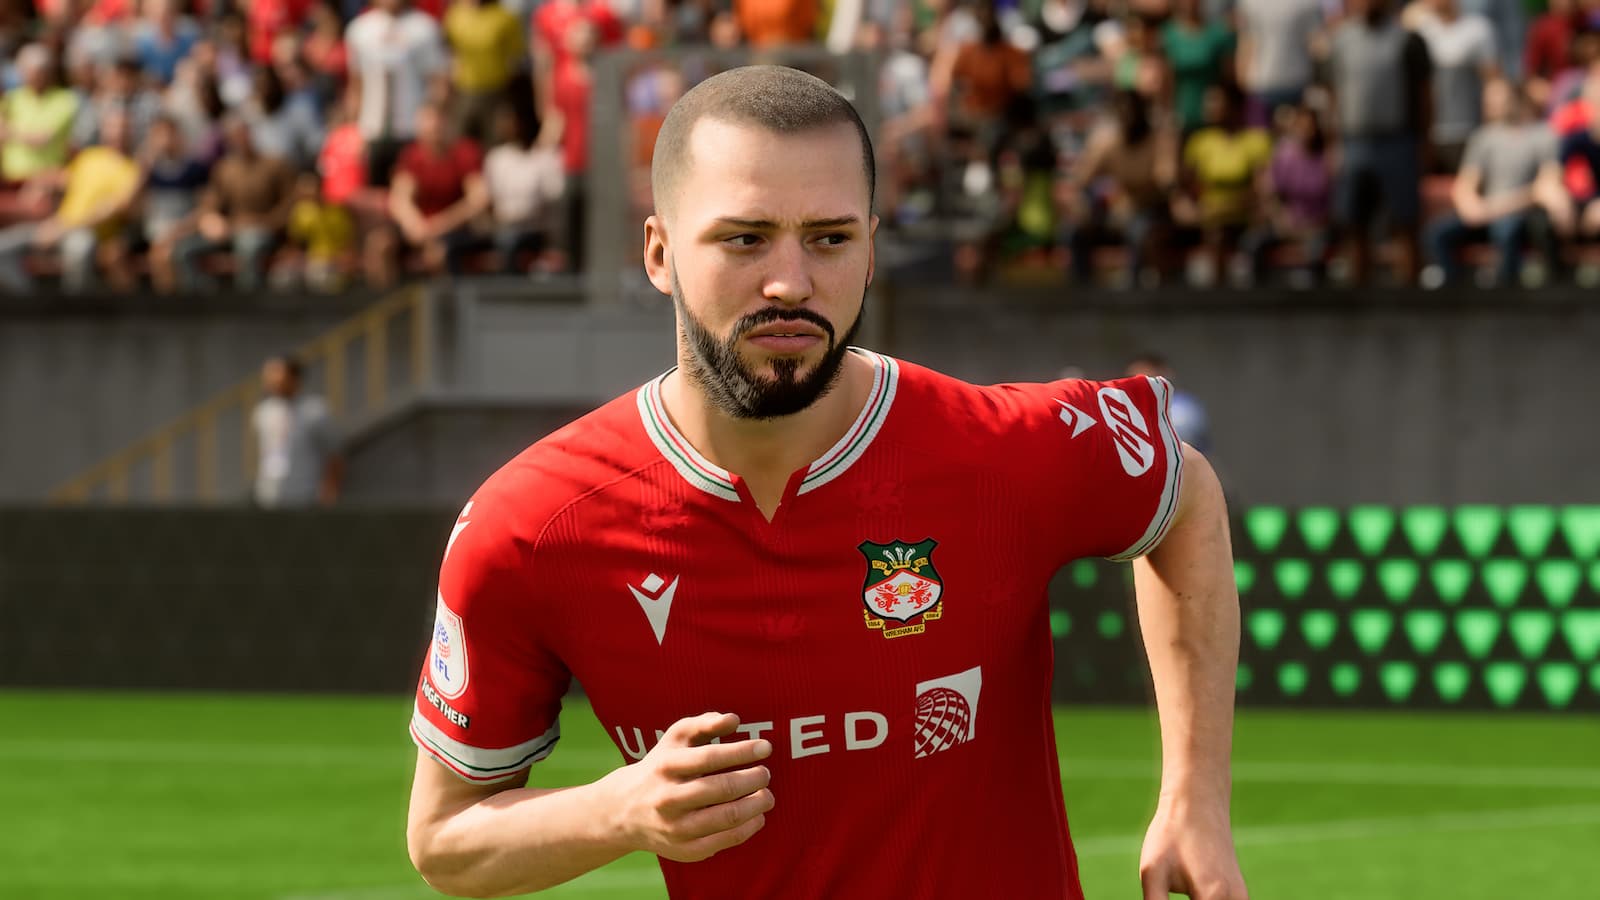 Wrexham AFC player in EA FC 24